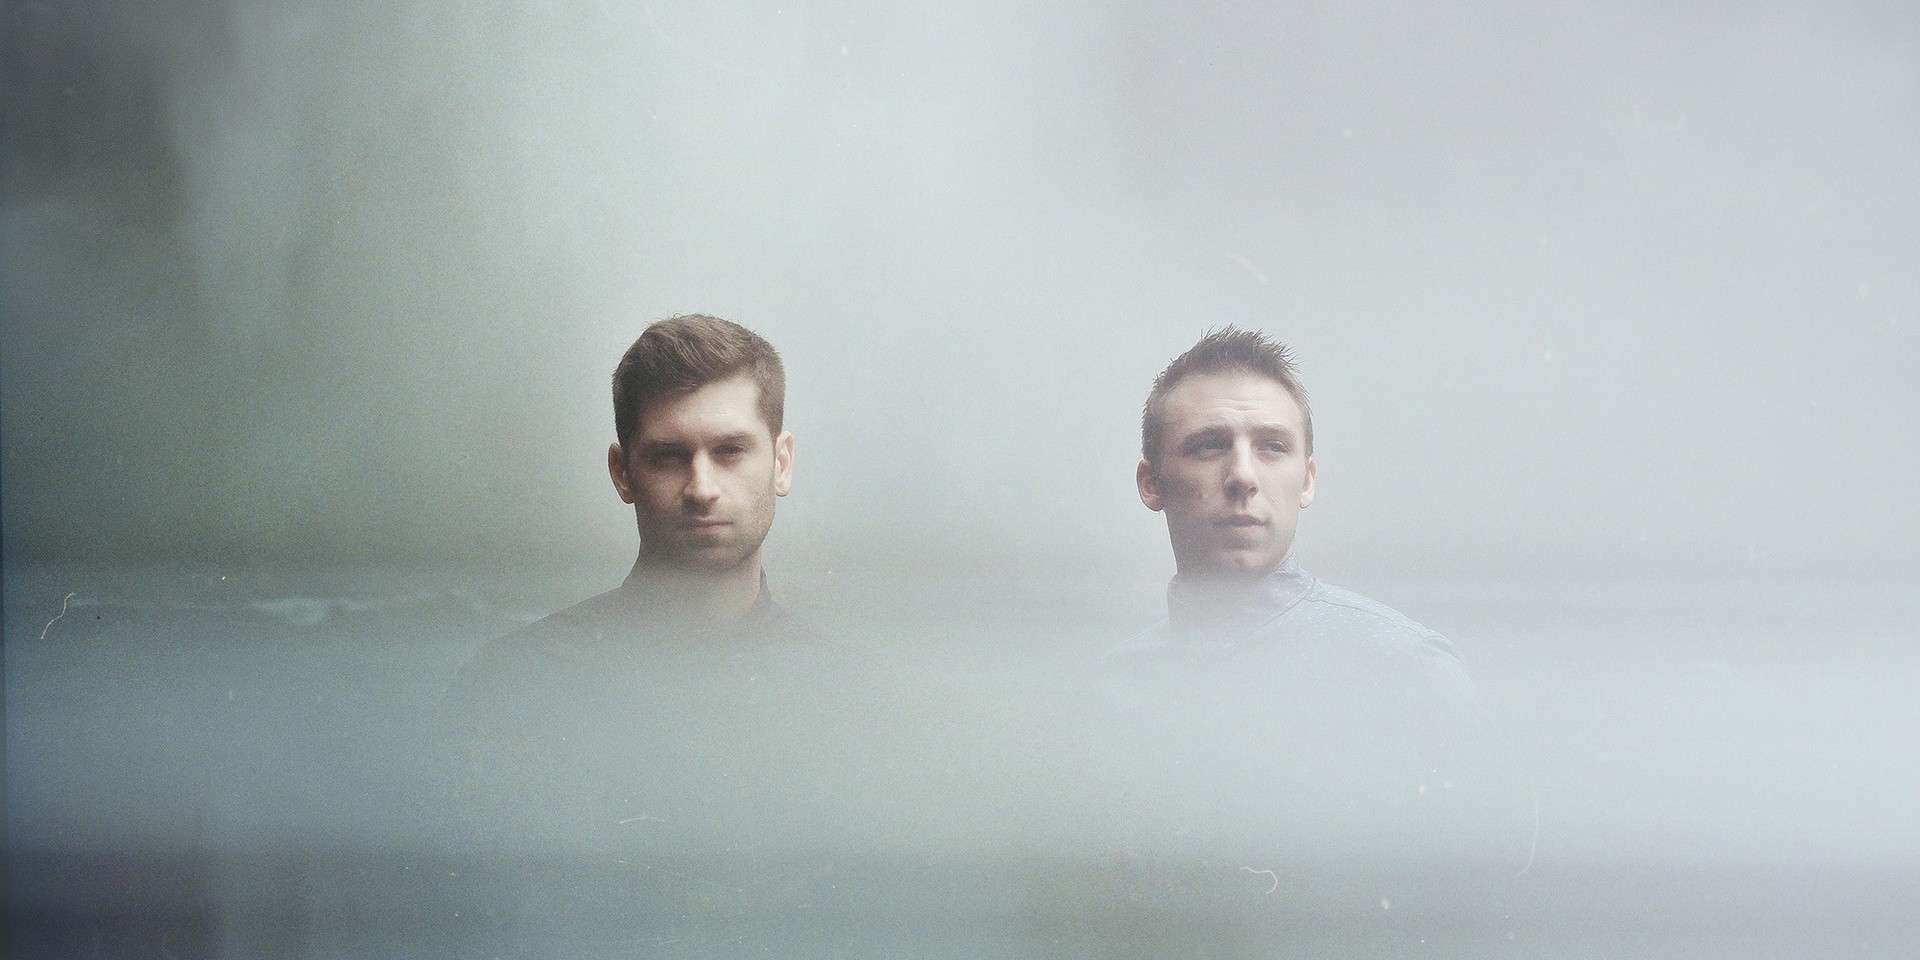 Clayton Knight of ODESZA on what motivates them, what he appreciates about the state of dance music, and more